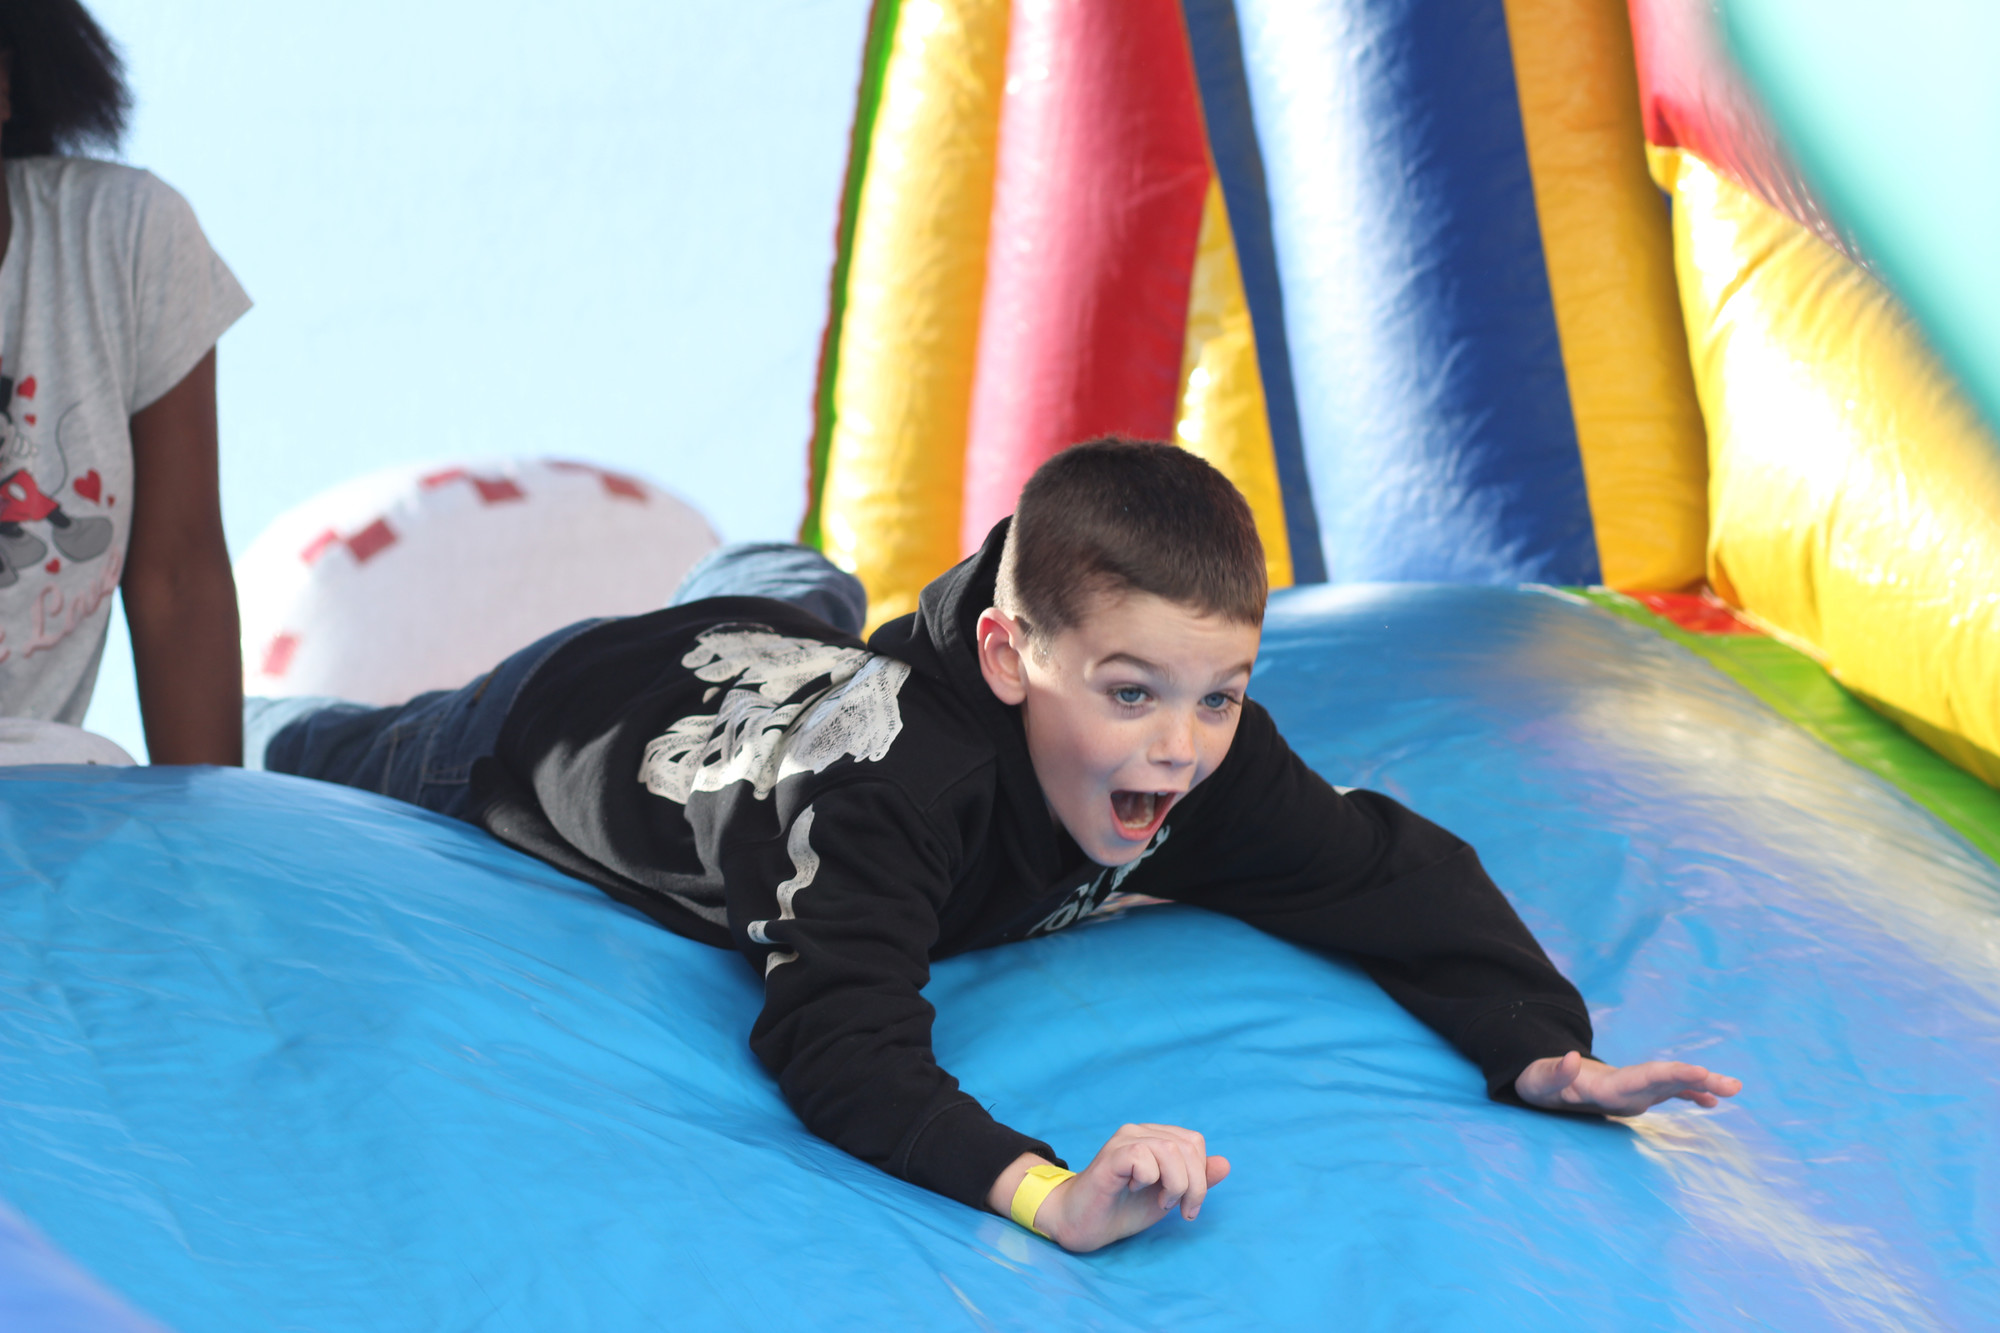 Jason Brady, 8, enjoyed the slide at Meadow School Carnival in Baldwin.  Alongside two bounce houses were carnival games, cotton candy, popcorn, and facepainting to keep the kids busy.